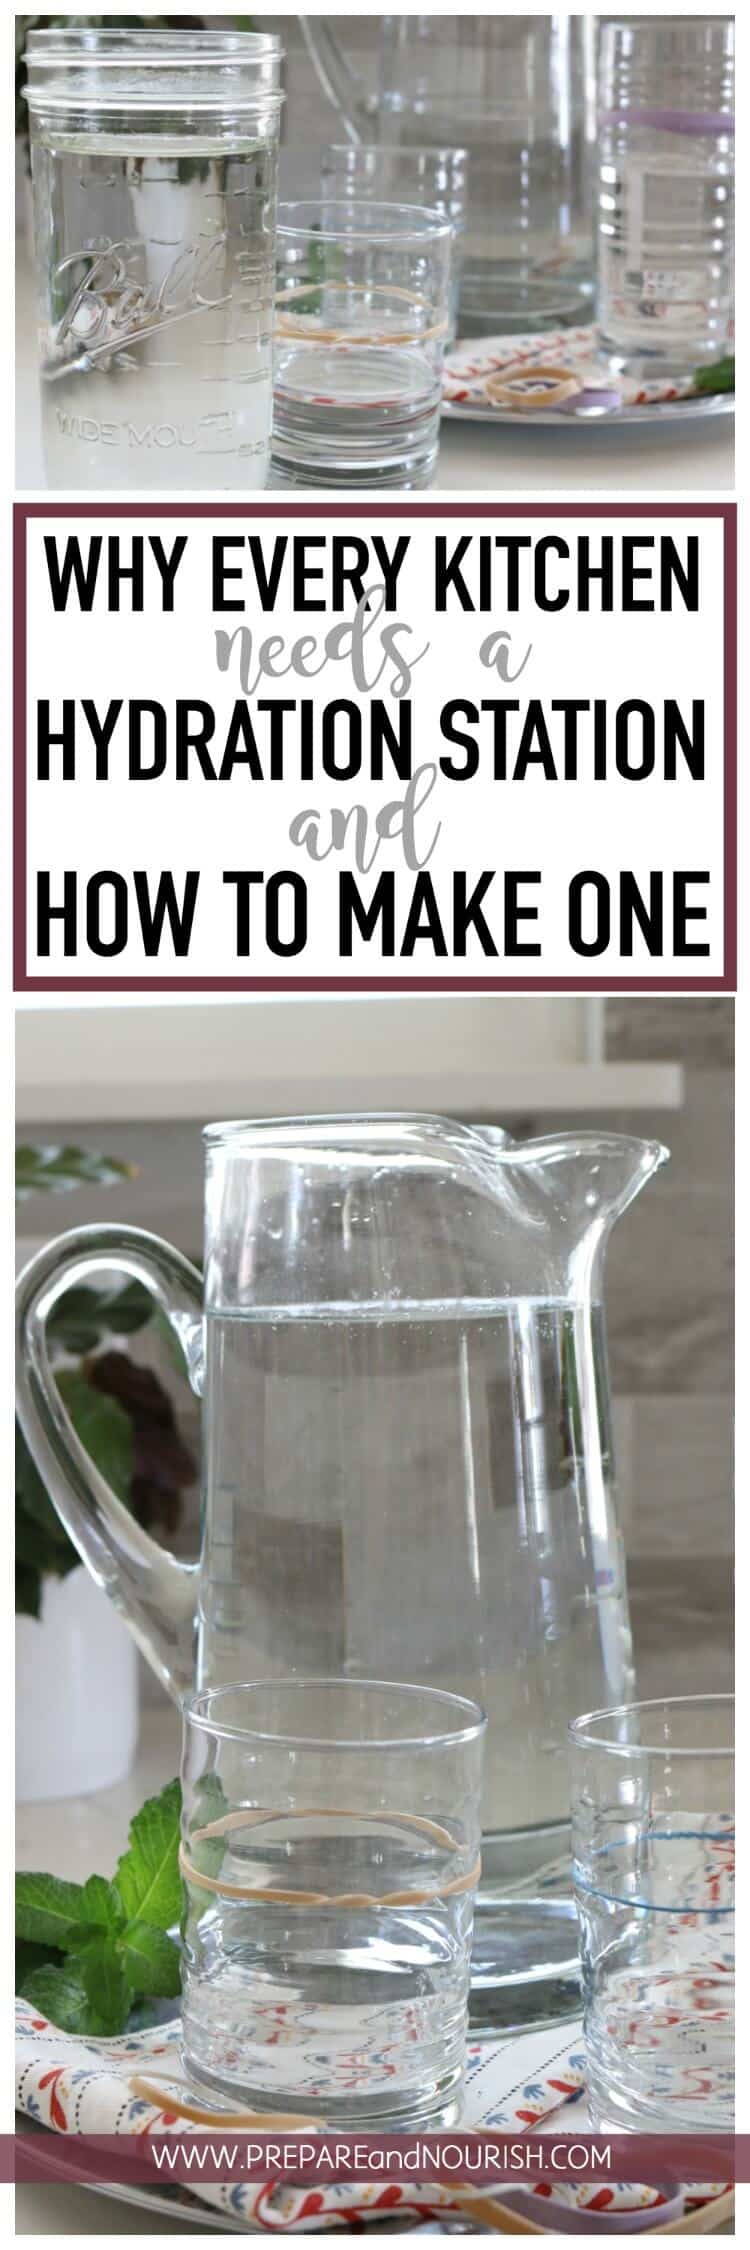 Why Every Kitchen Needs a Hydration Station and How to Make One - Learn two reasons why every kitchen needs a hydration station and make one today!